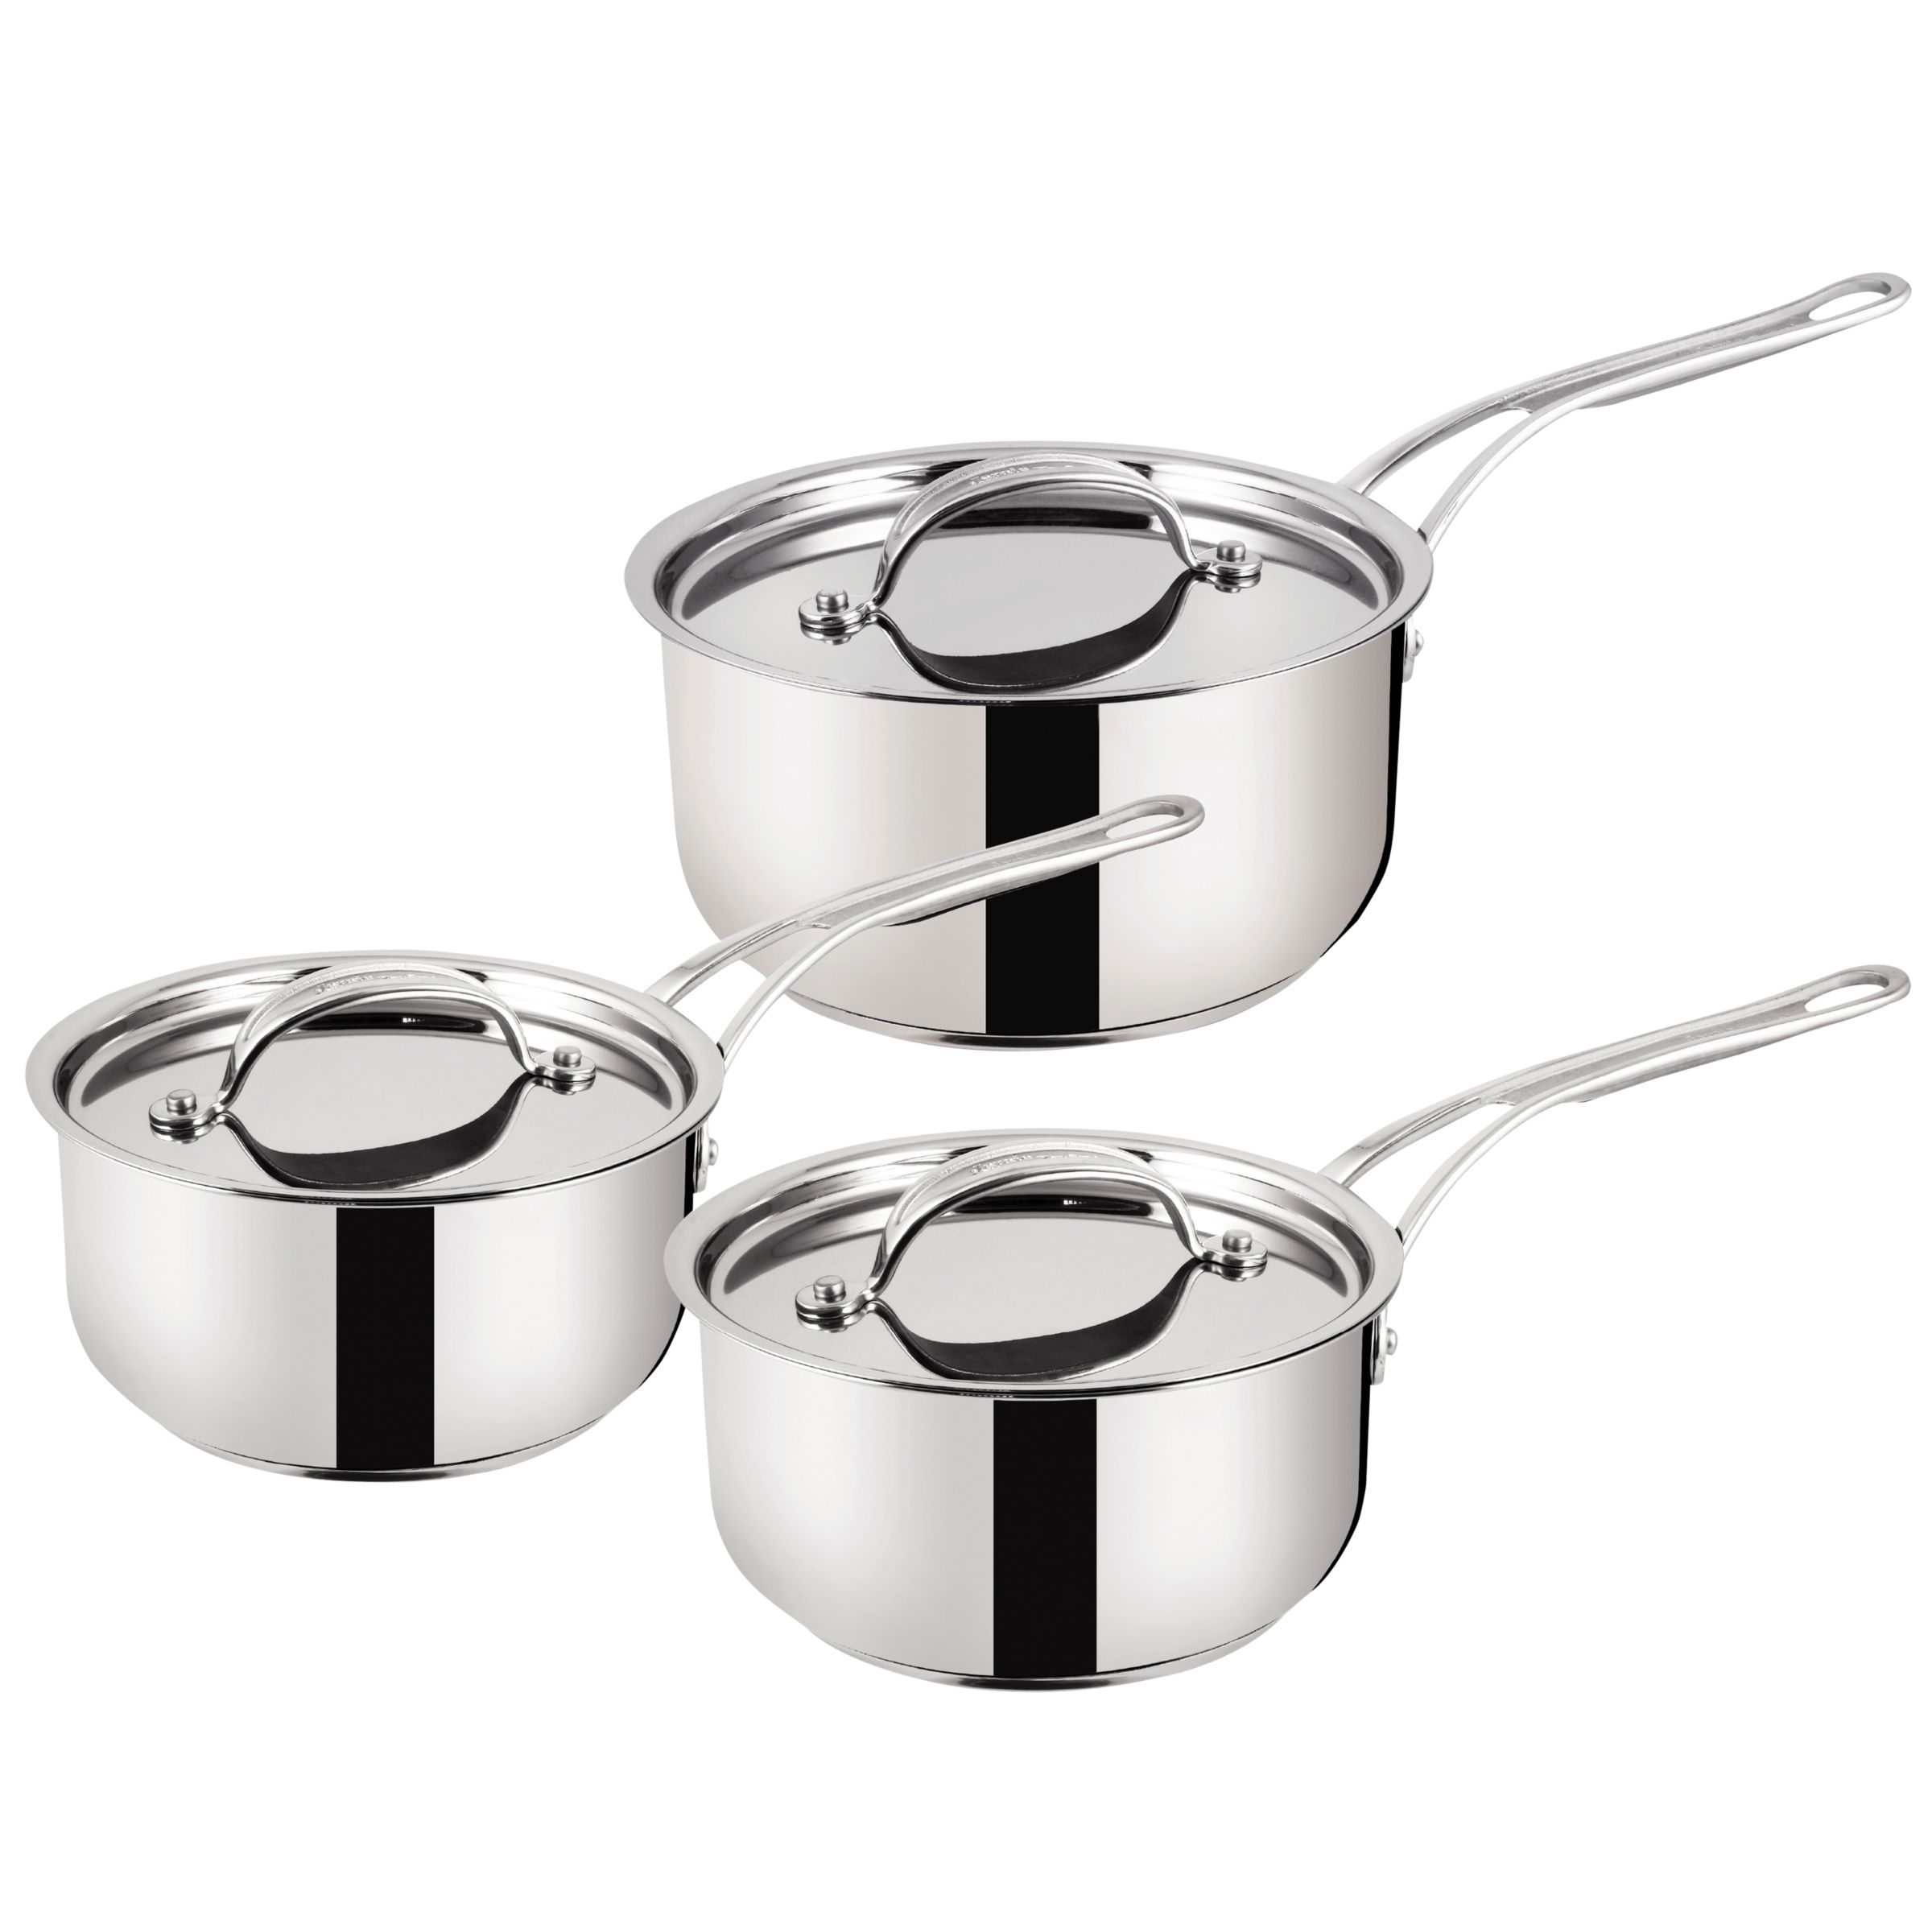 Jamie Oliver By Tefal Ingenio Induction Frypan 3 Piece Set In Stainless  Steel